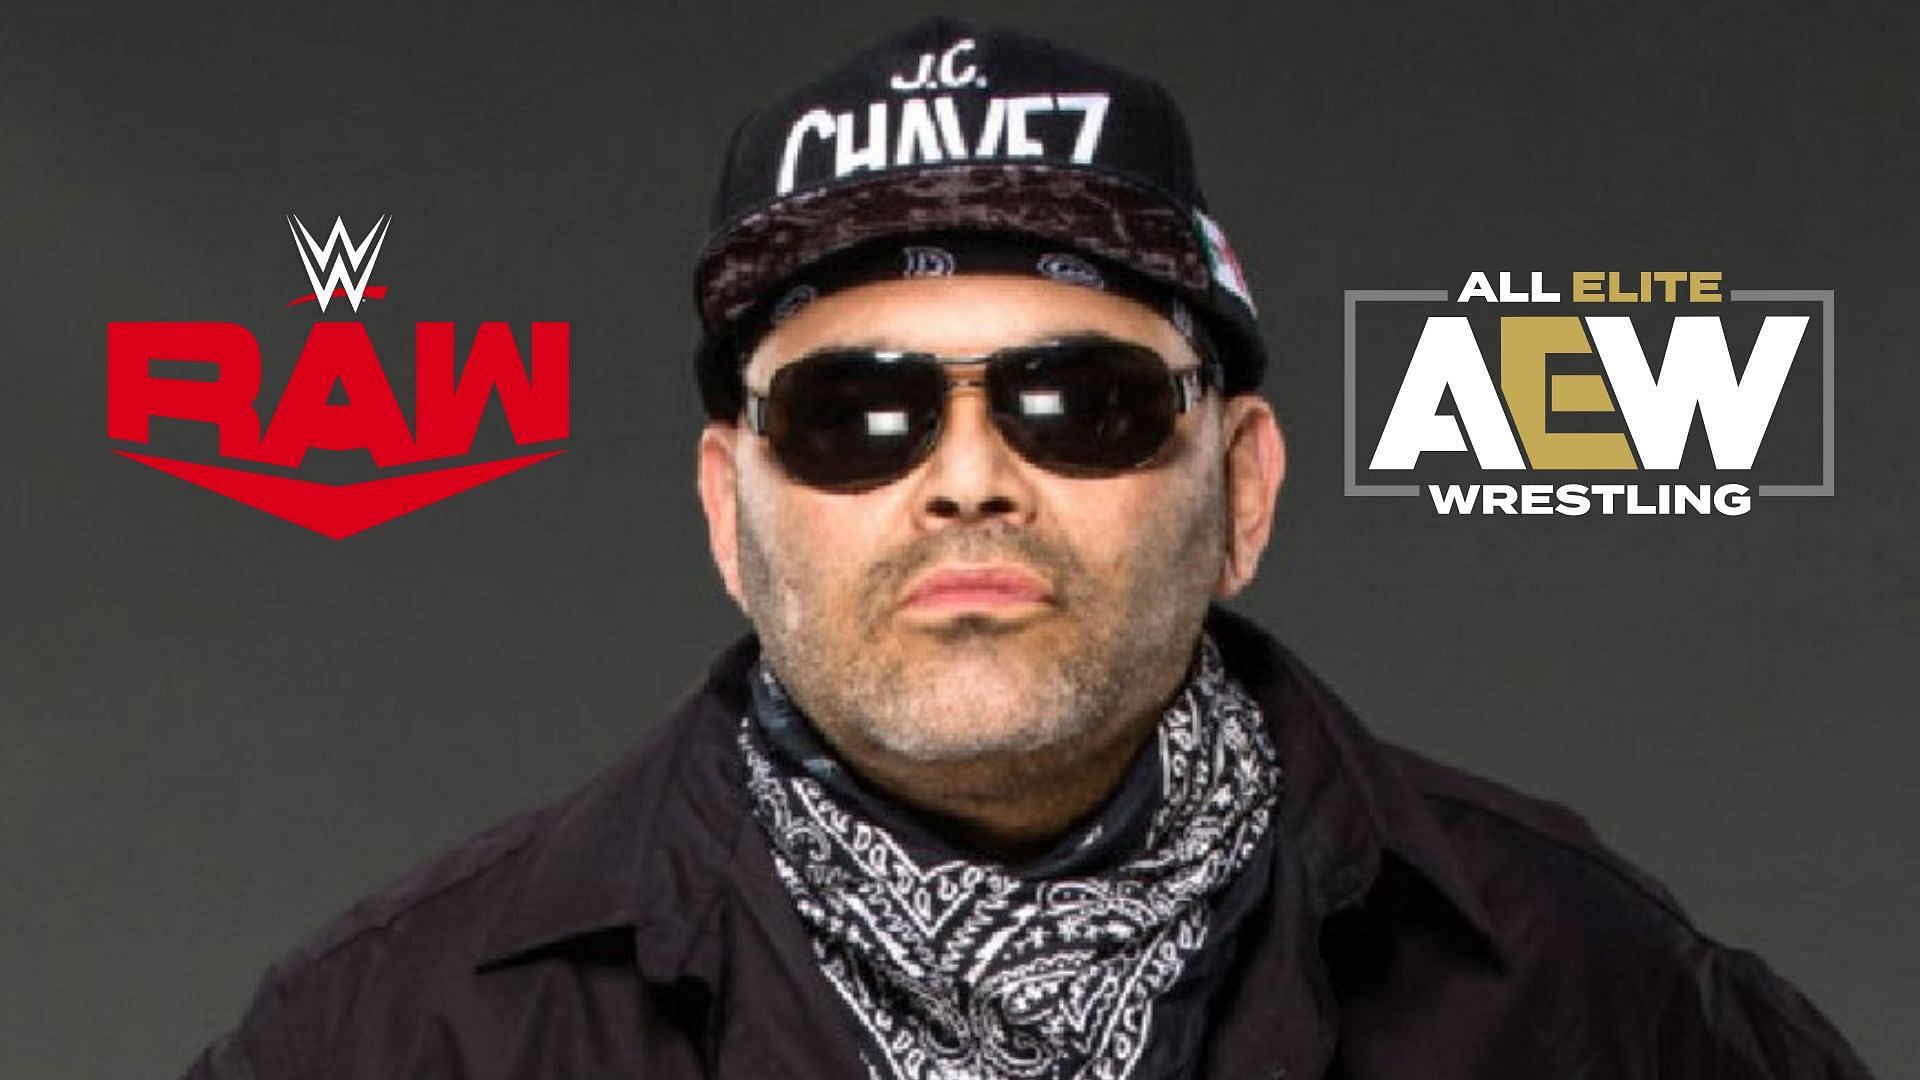 Konnan has given his thoughts on a team being held back in AEW